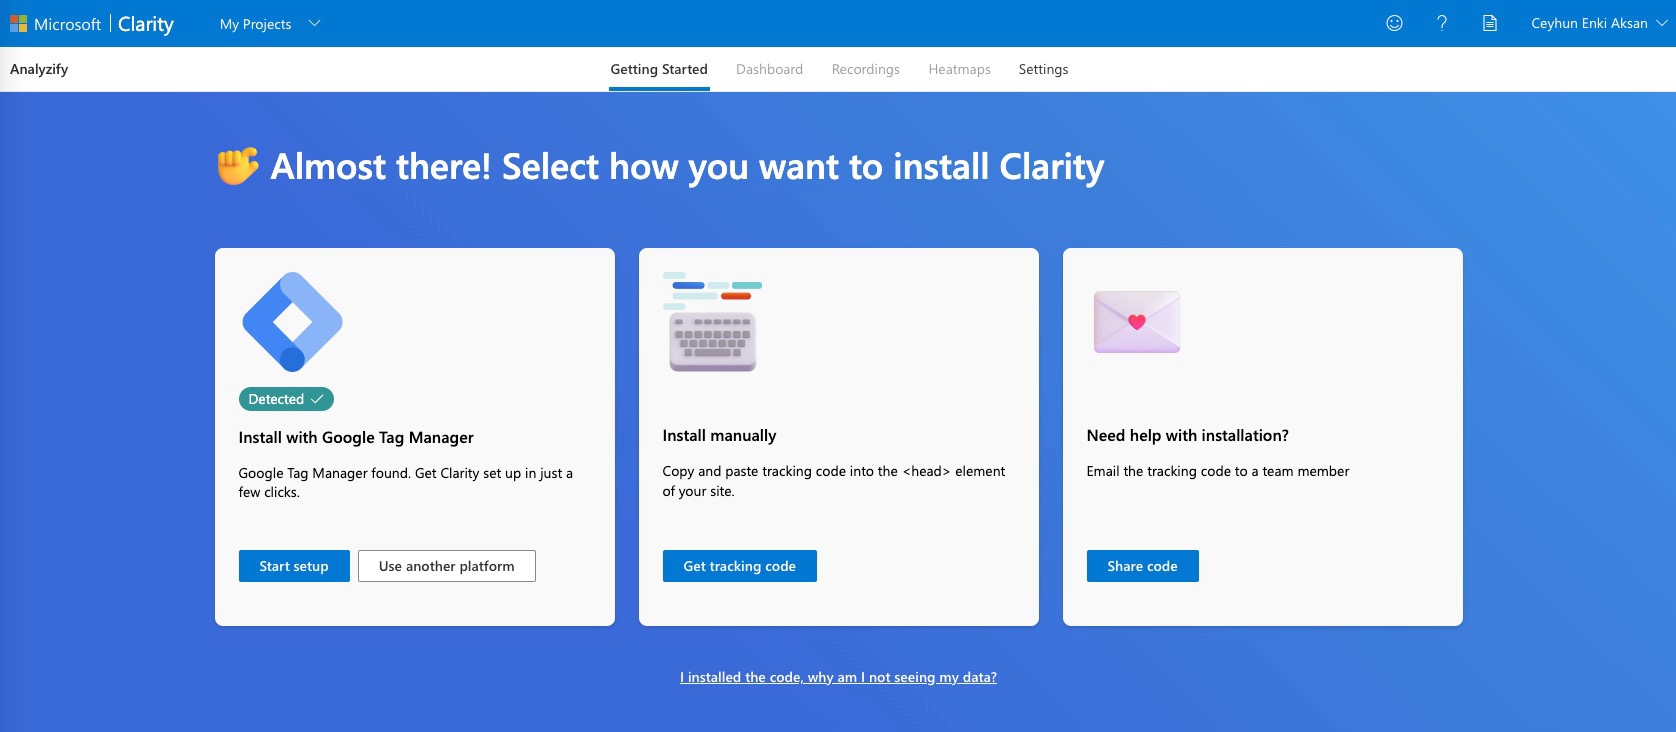 Log in to your Microsoft Clarity account